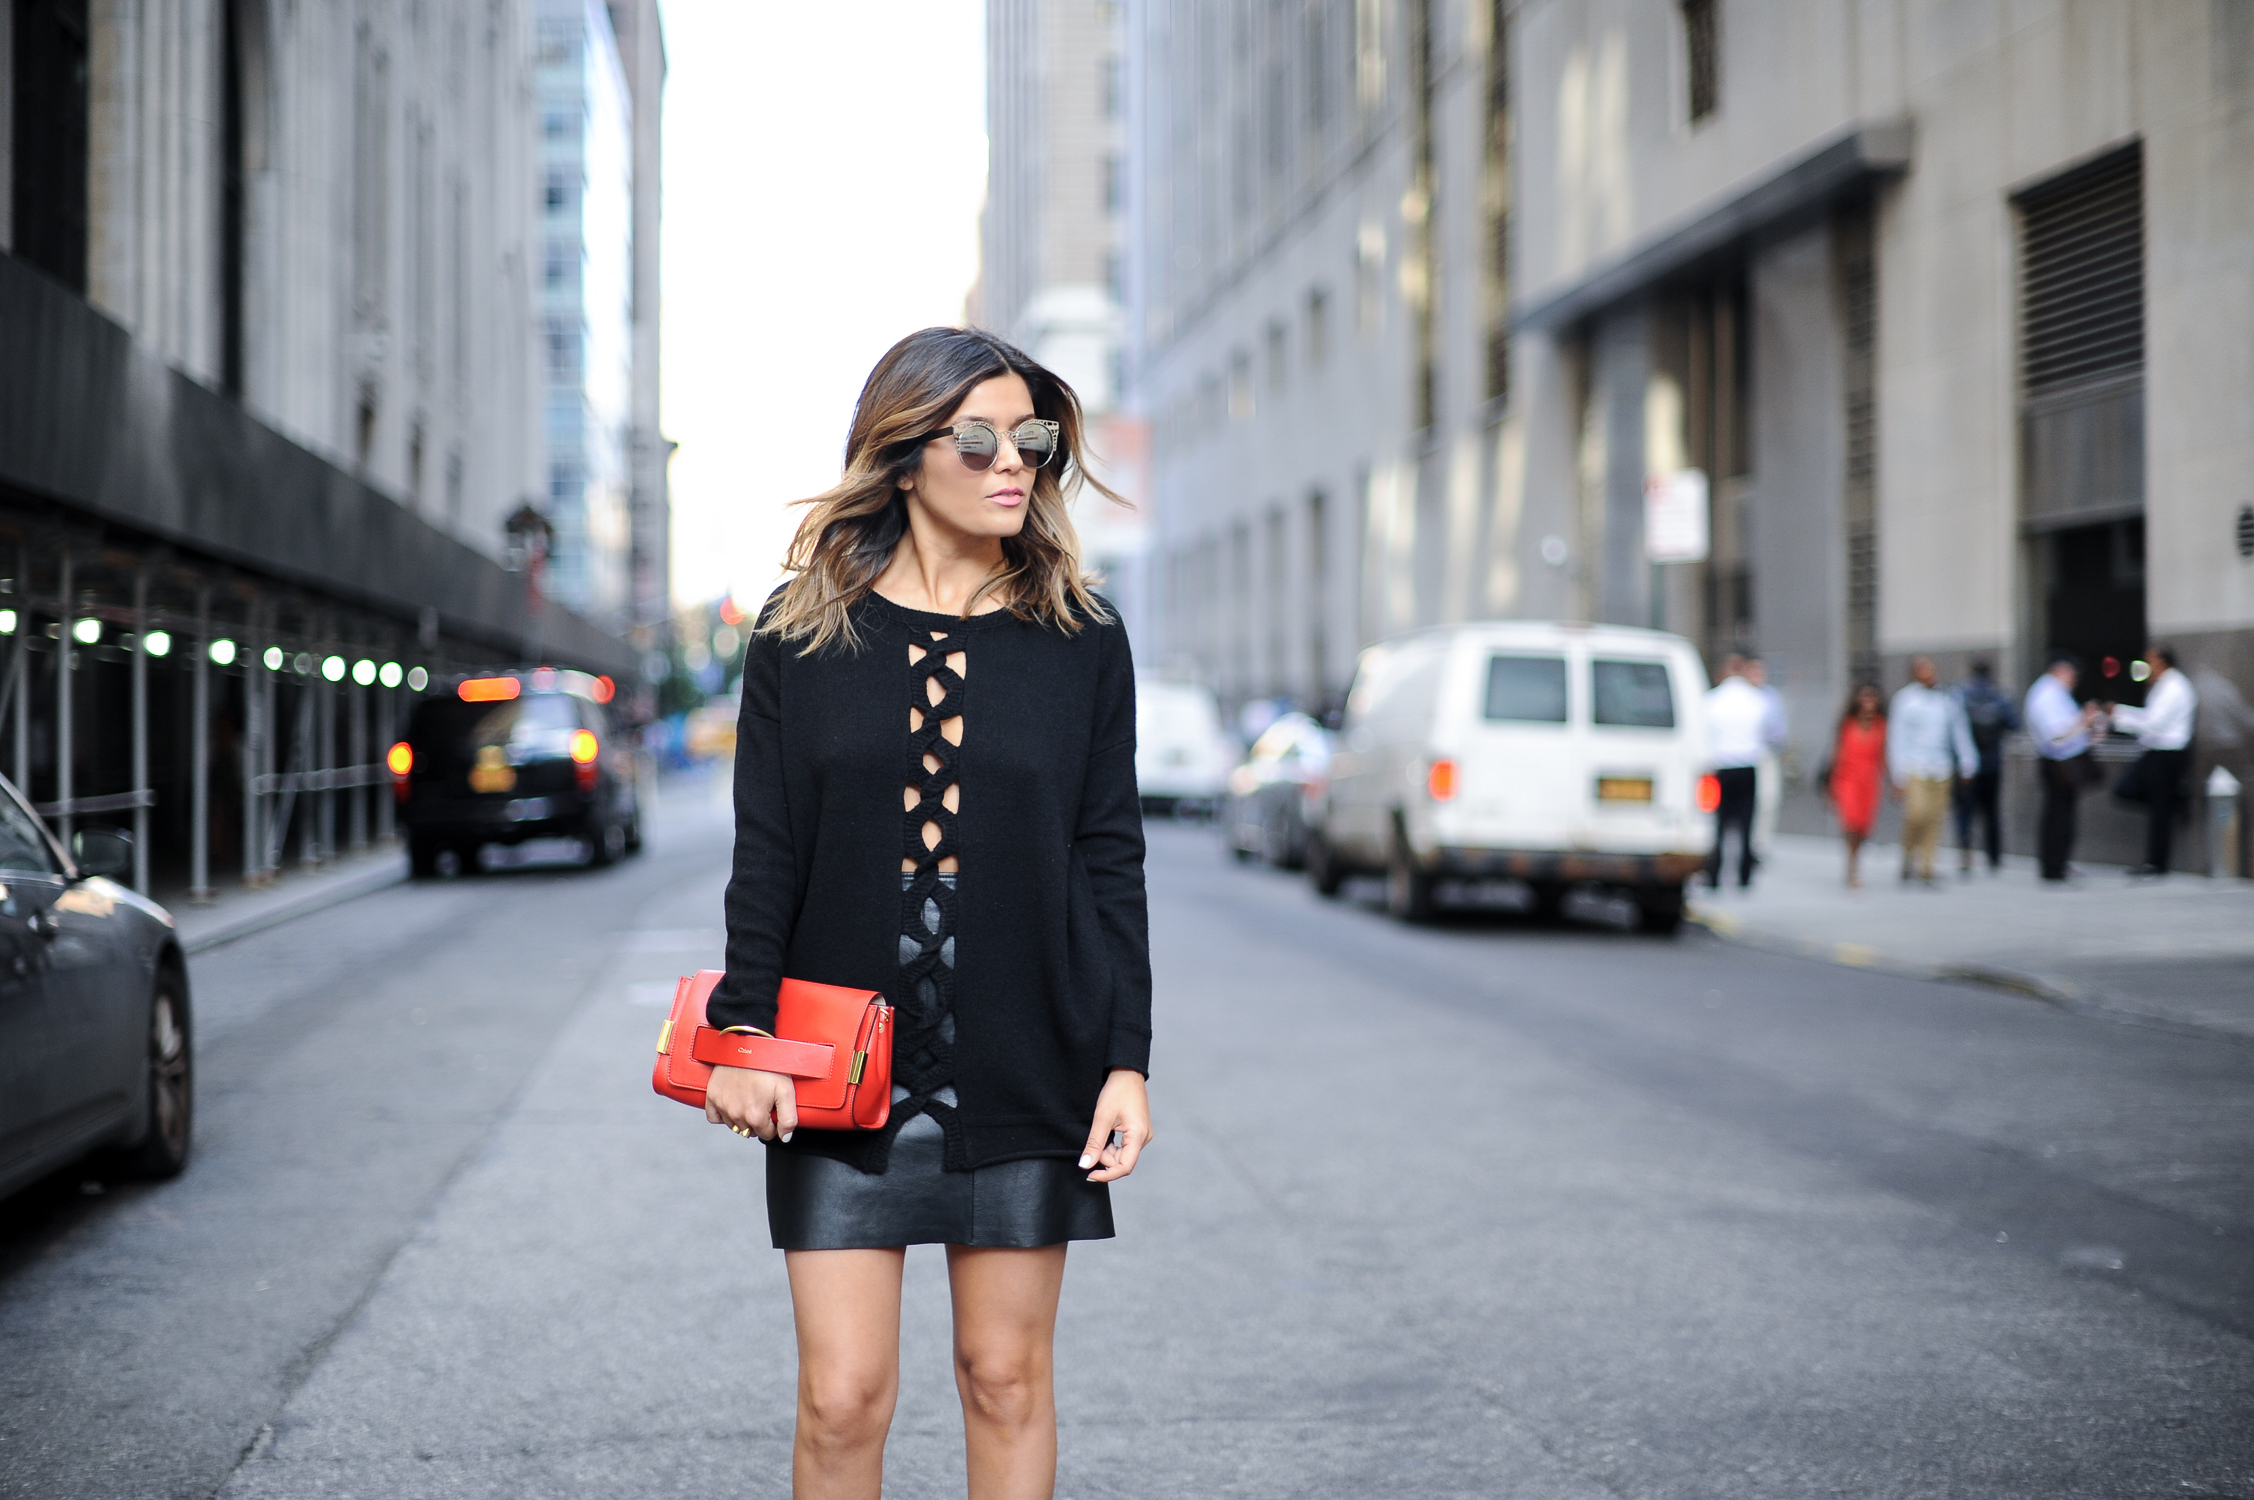 Leather skirt and red chloe bag